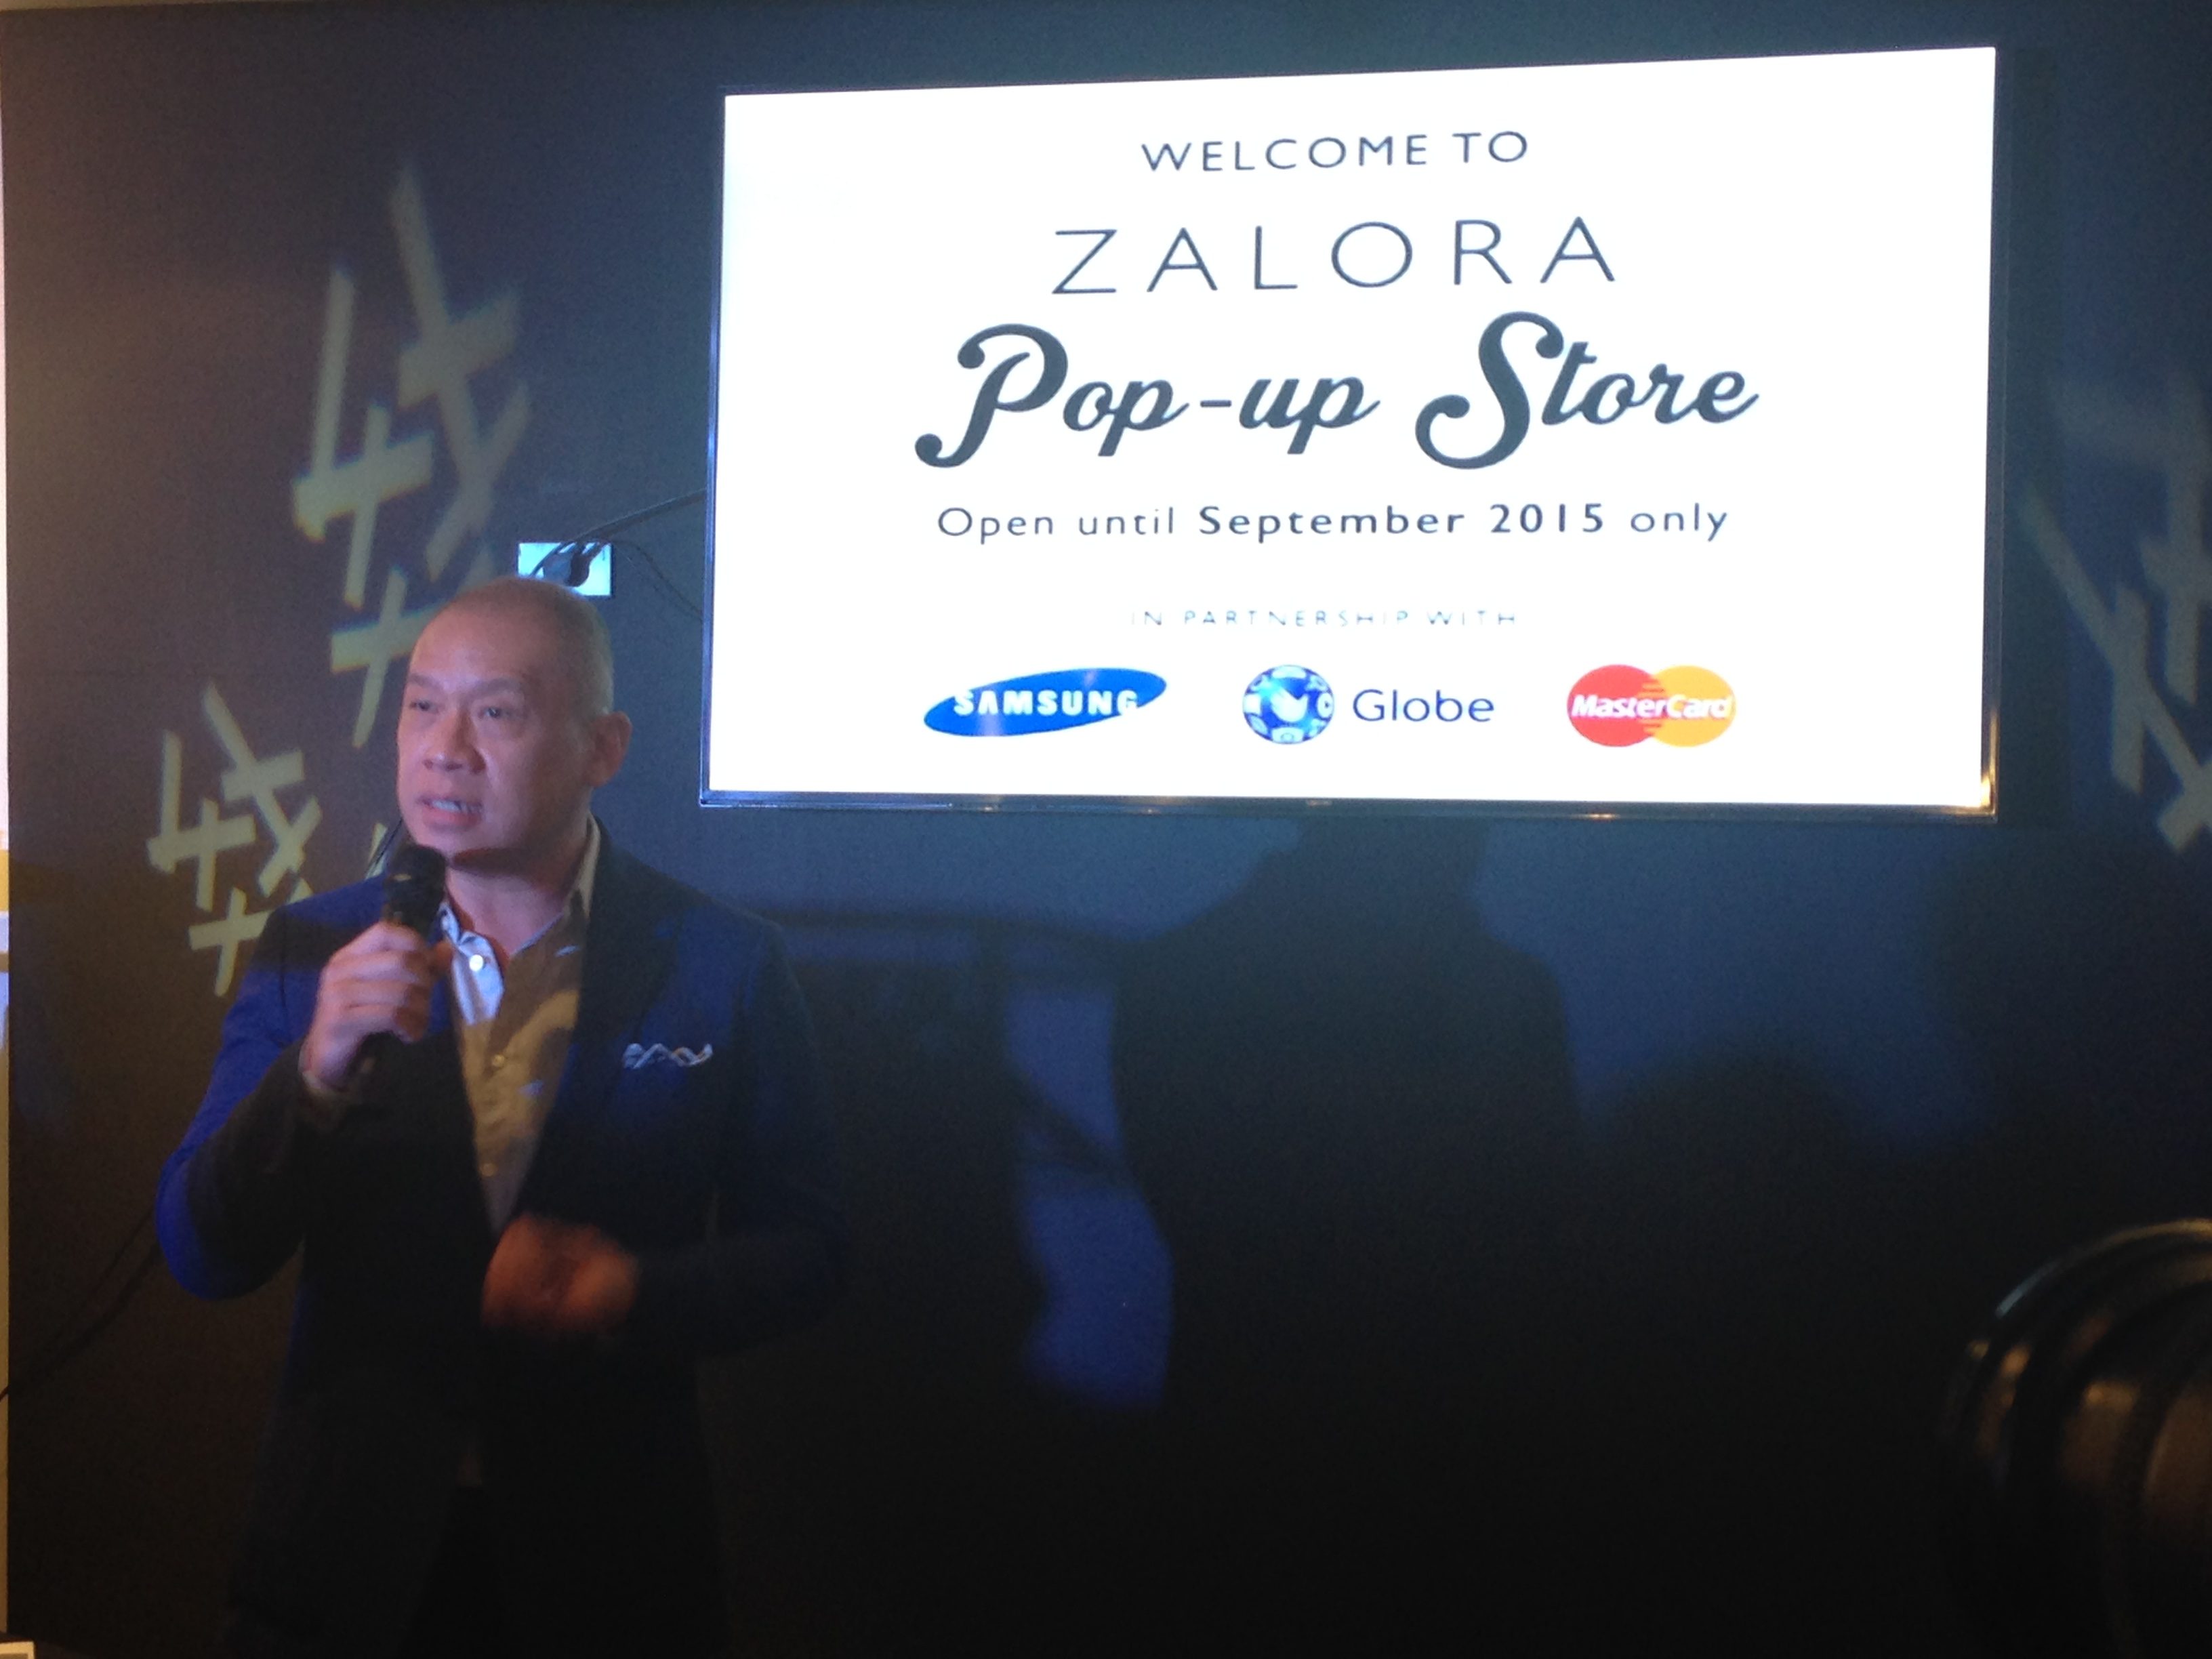 GAME-CHANGER. Globe's Ernest Cu says he is excited to collaborate with Zalora to further grow the e-commerce industry in the country with the game-changing offer 